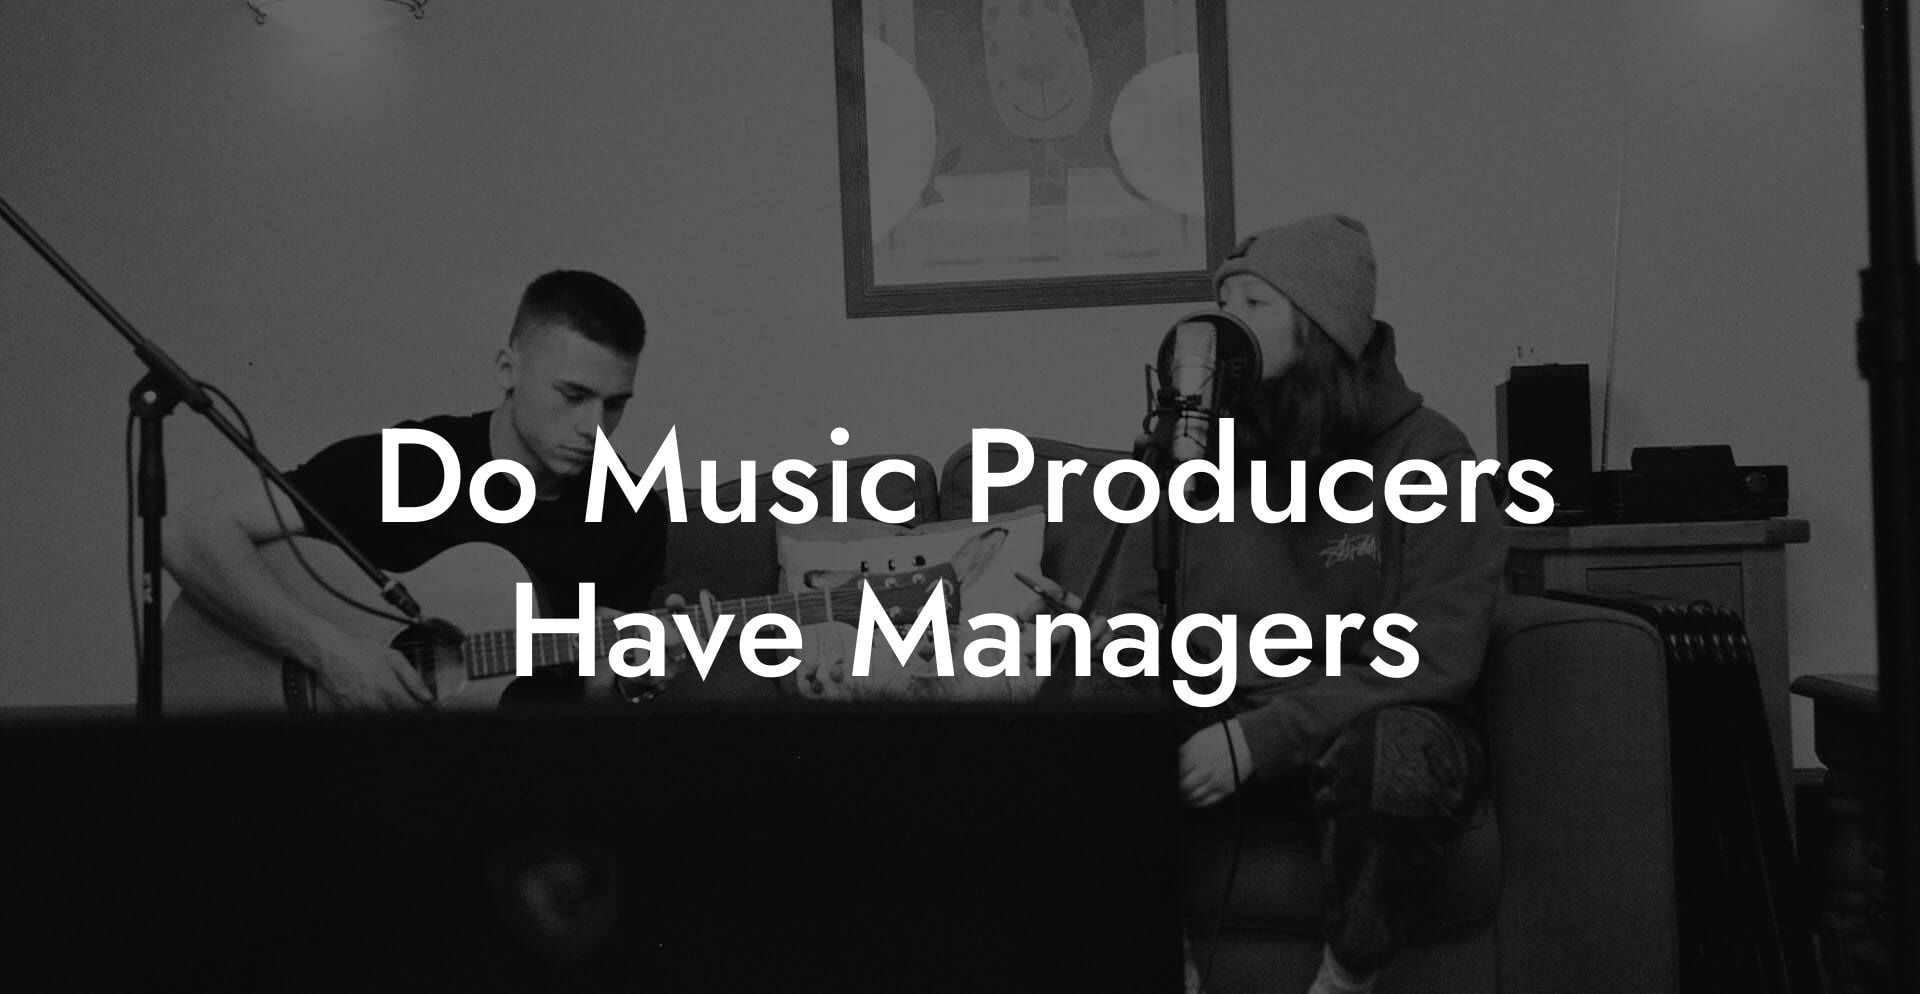 Do Music Producers Have Managers